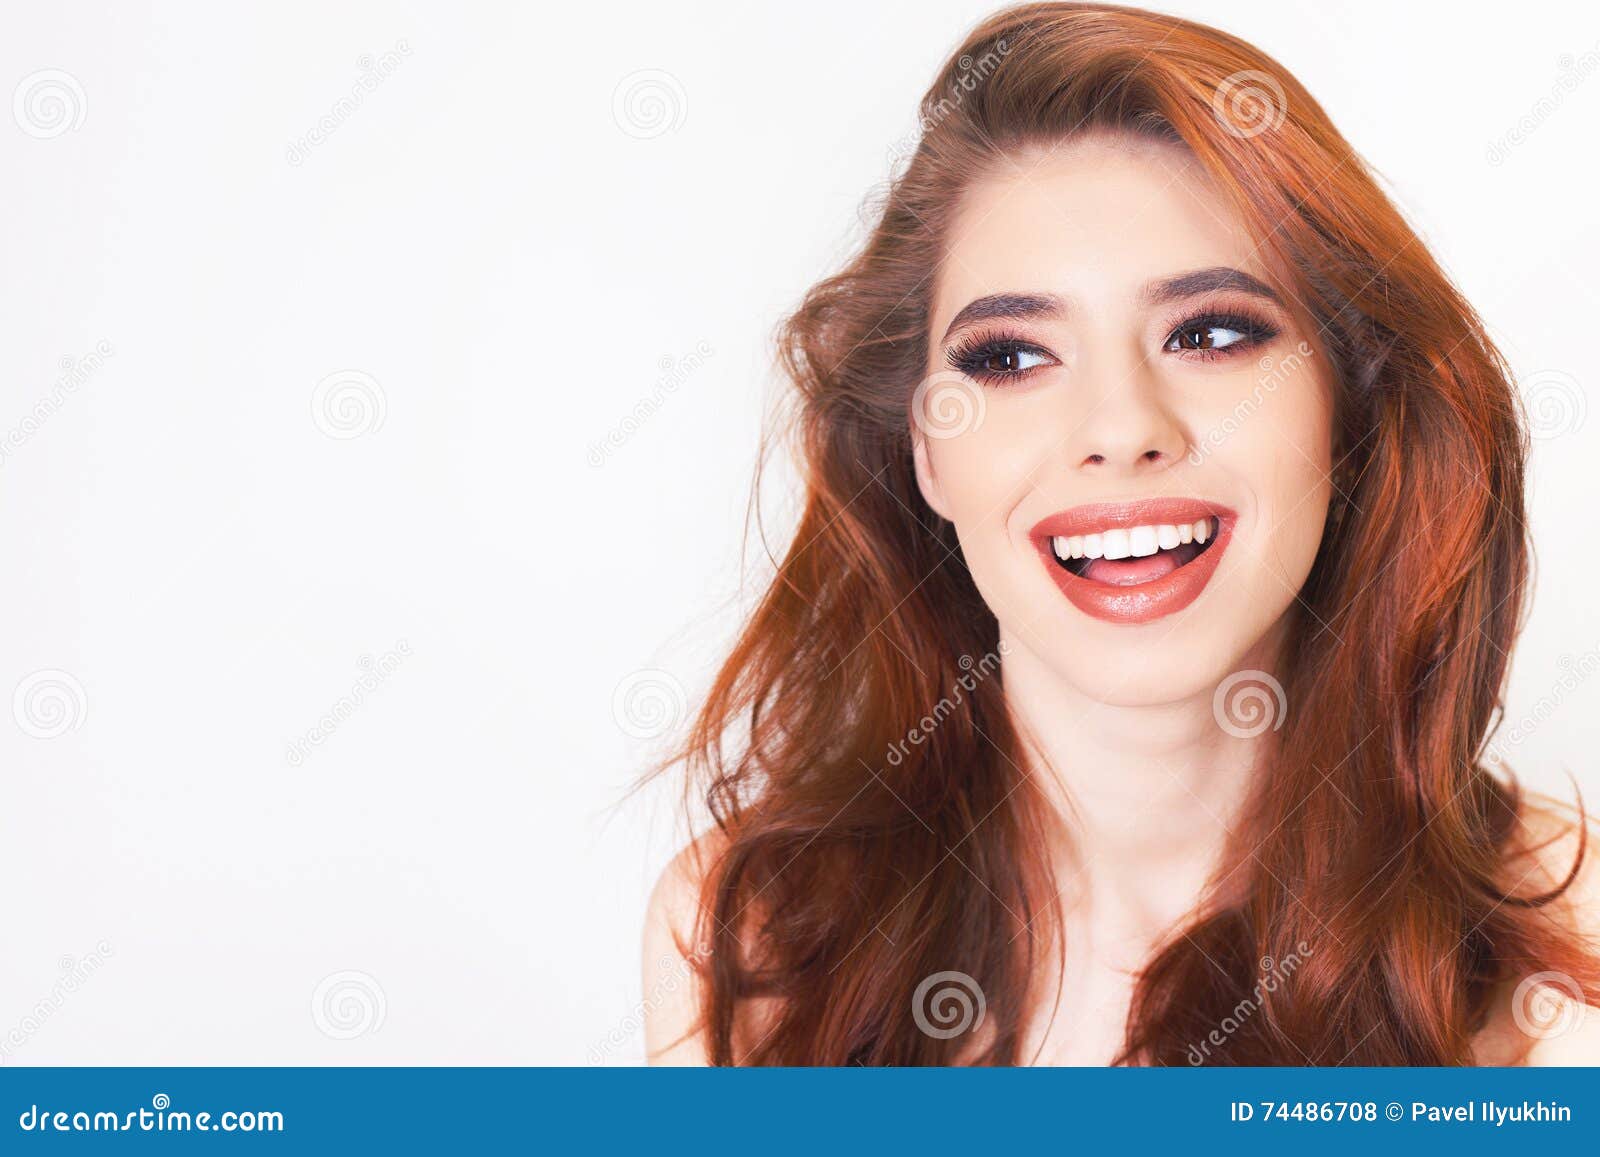 surprised young woman with healthy perfect hair and white smile